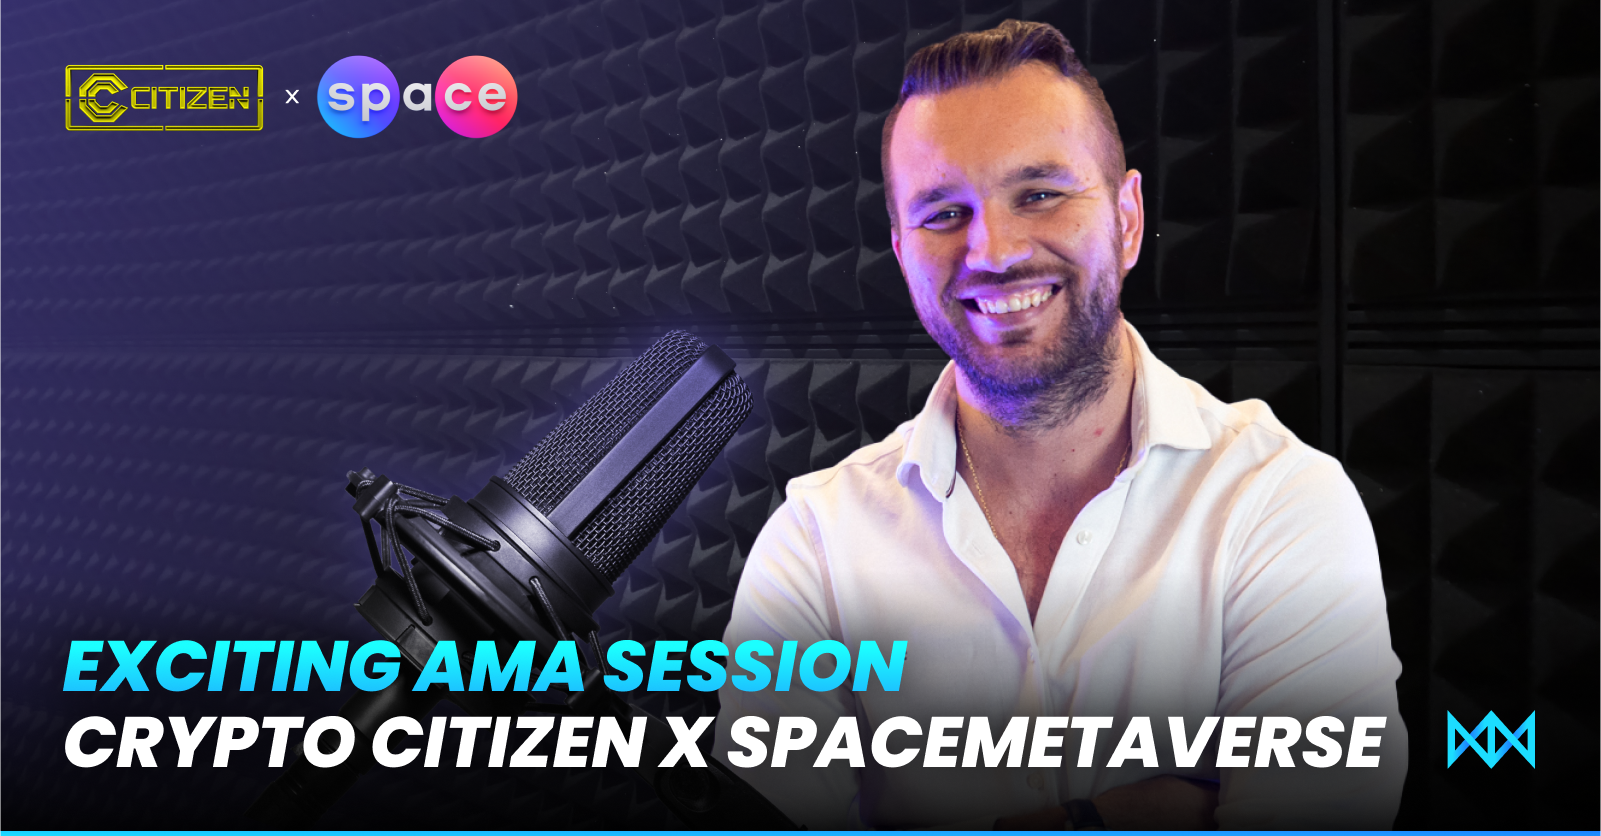 Exciting AMA Session Crypto Citizen x SpaceMetaverse